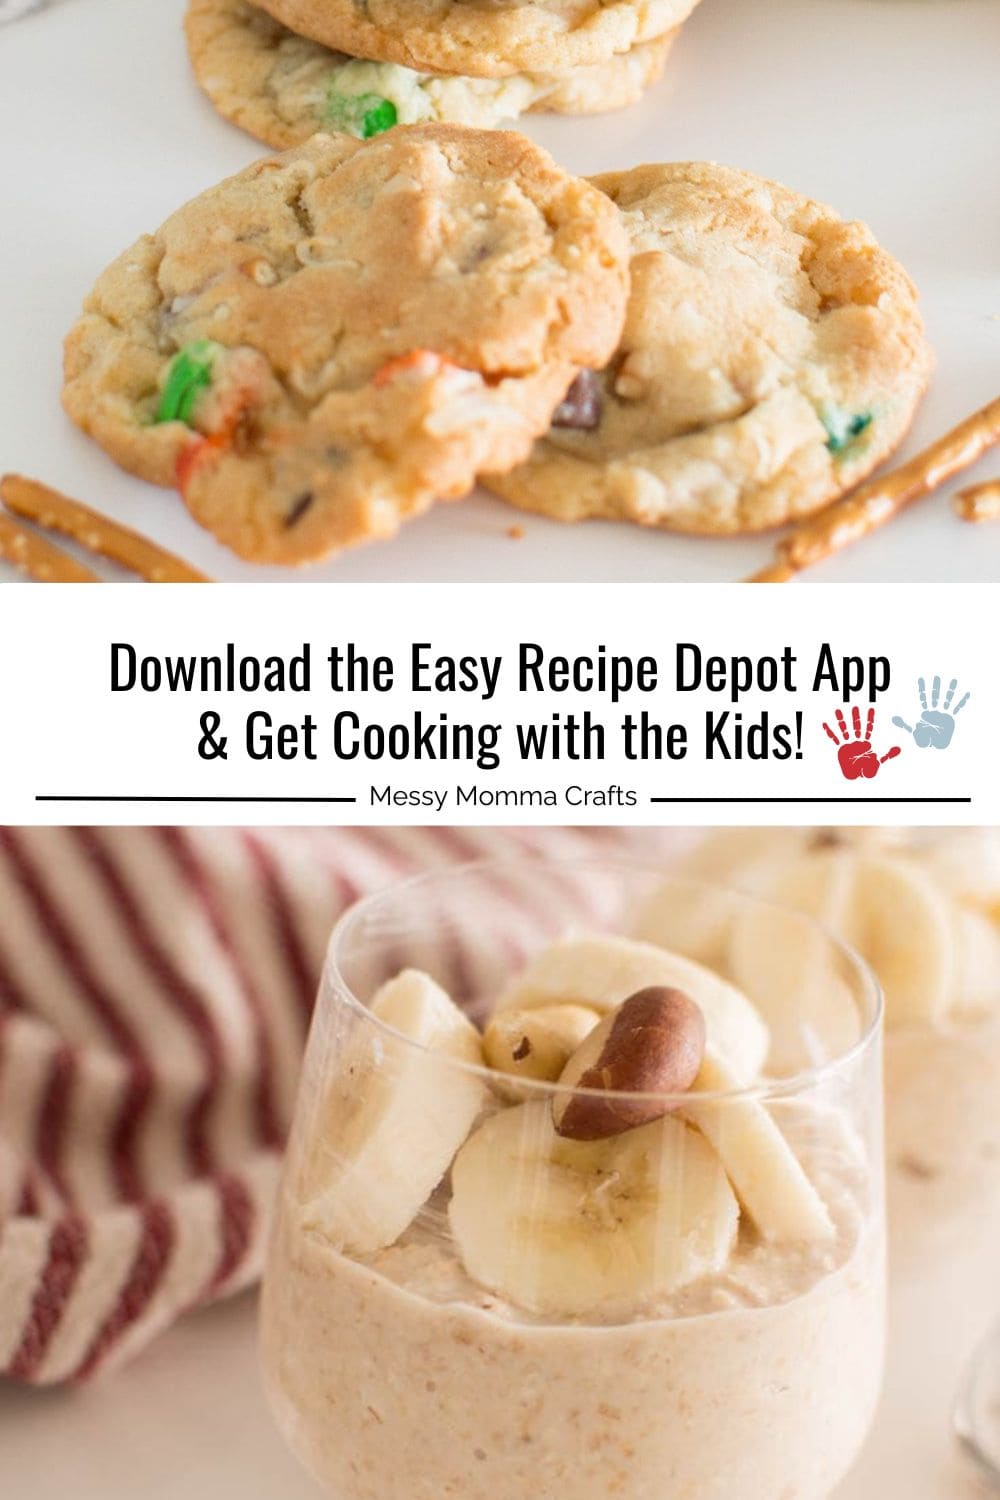 Download the Easy Recipe Depot app and get cooking with kids.